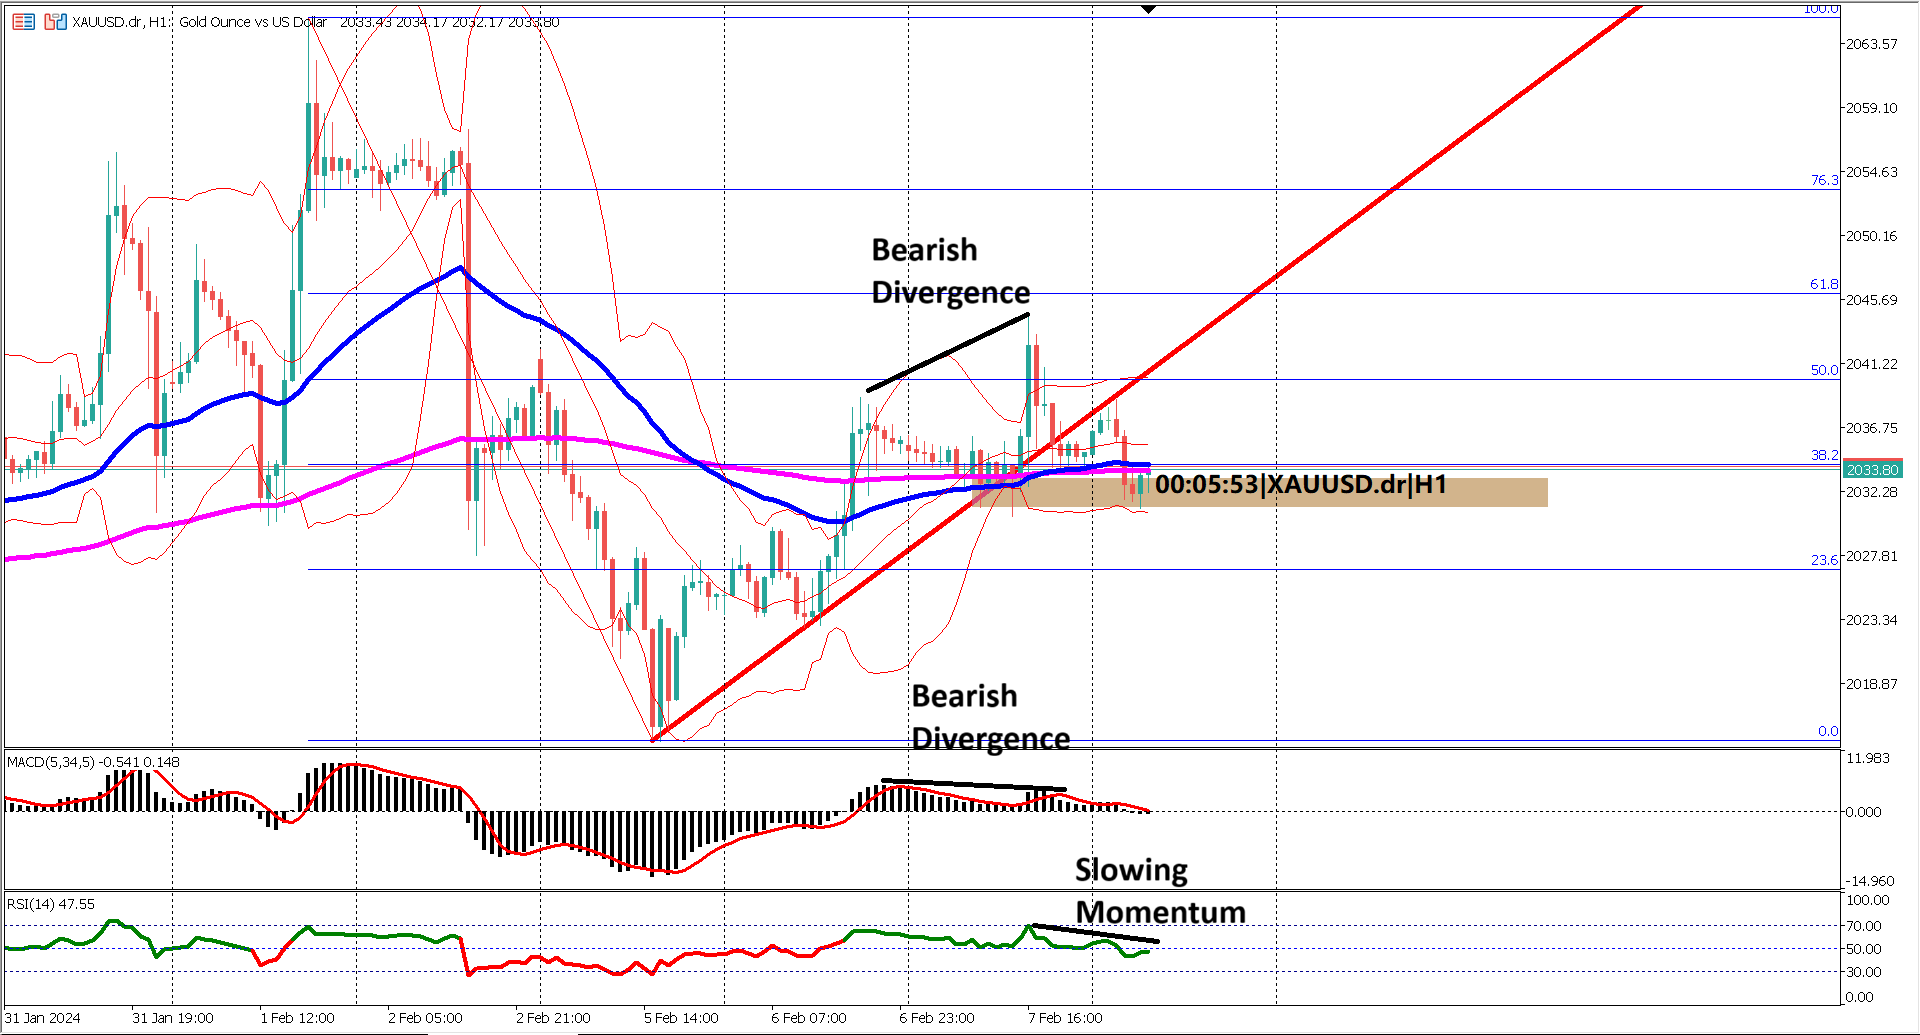 Sideways Trend Confusion: EMA Crosses and Divergences Complicate XAUUSD Outlook